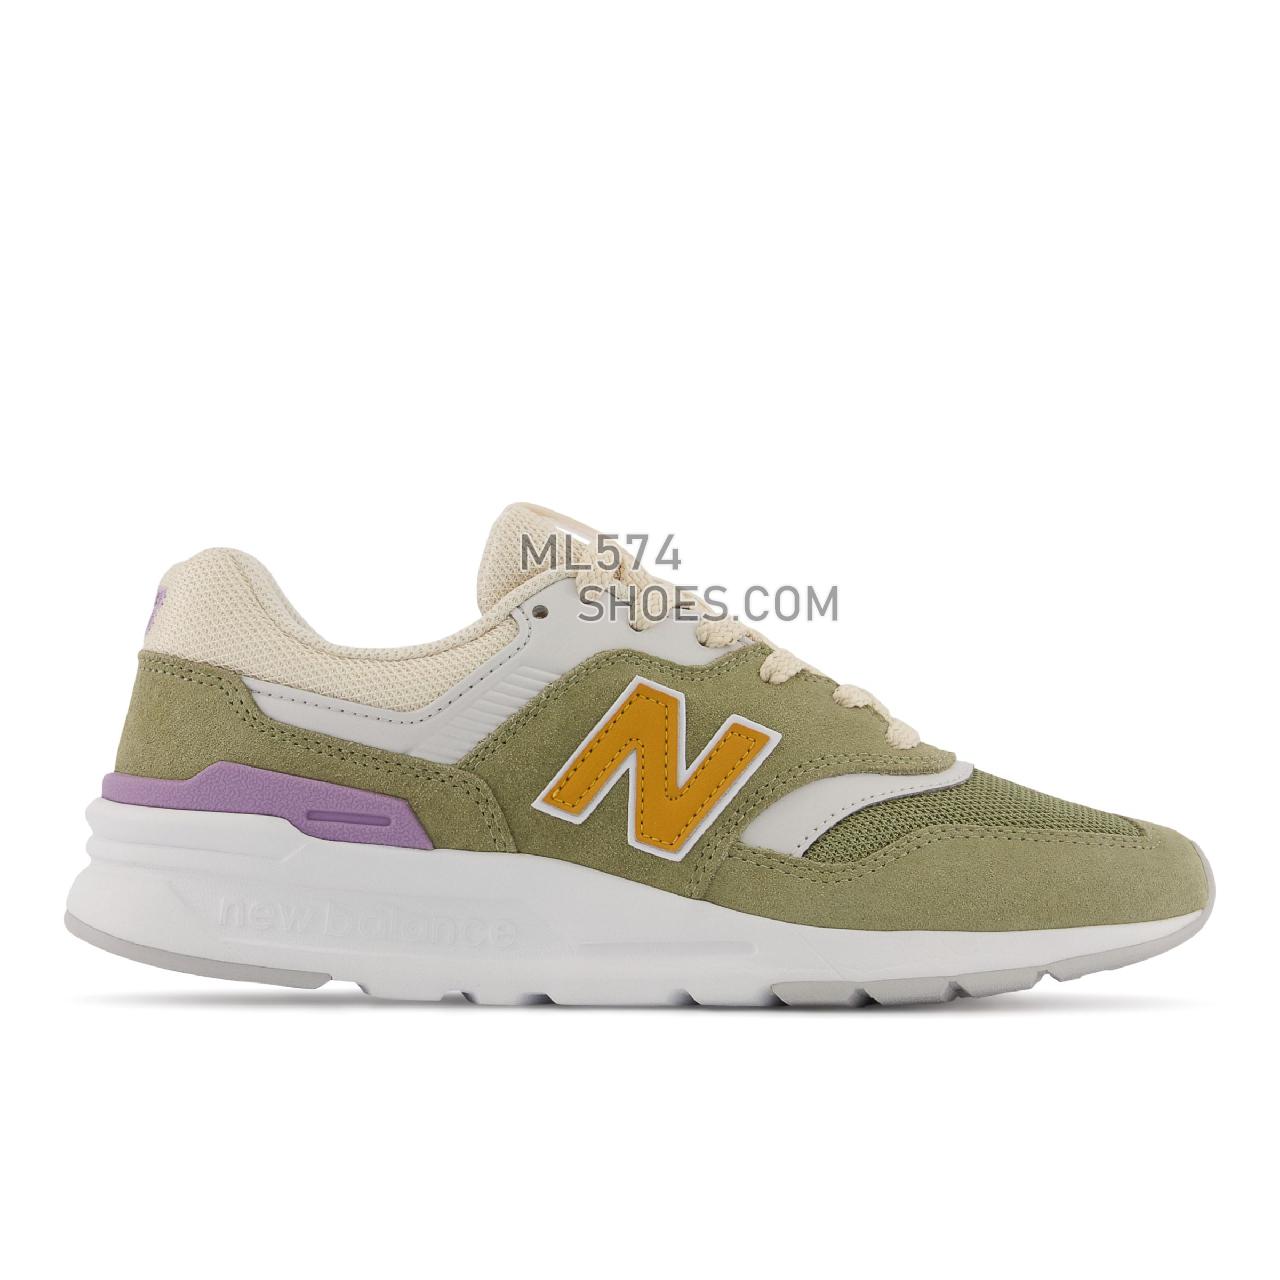 New Balance 997H - Women's Sport Style Sneakers - True Camo with Golden Hour - CW997HSV